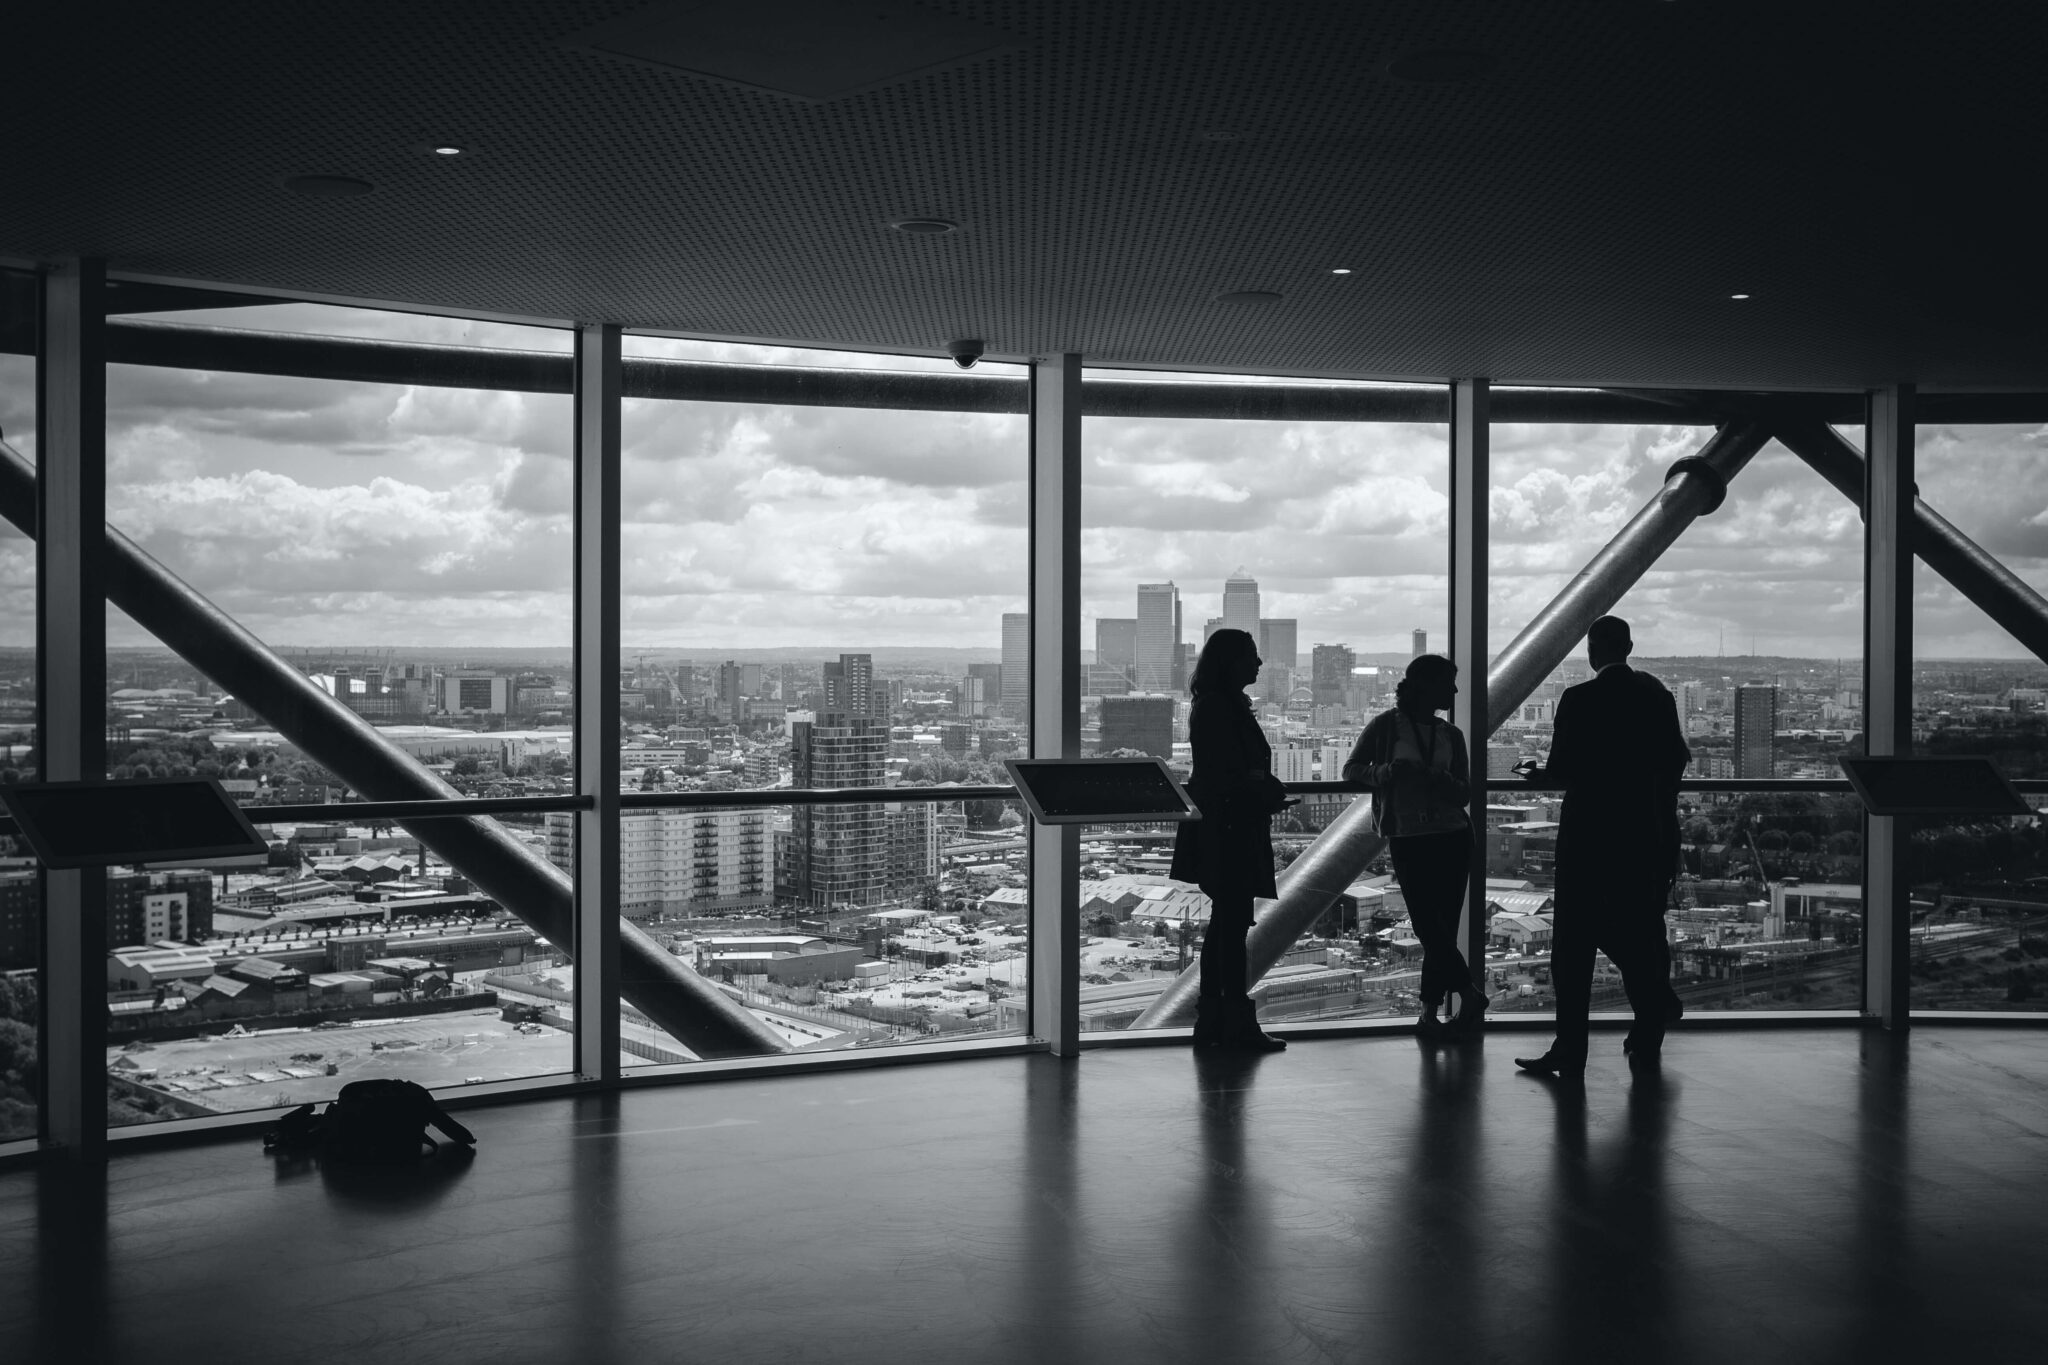 Three people in an office building overlooking a city skyline